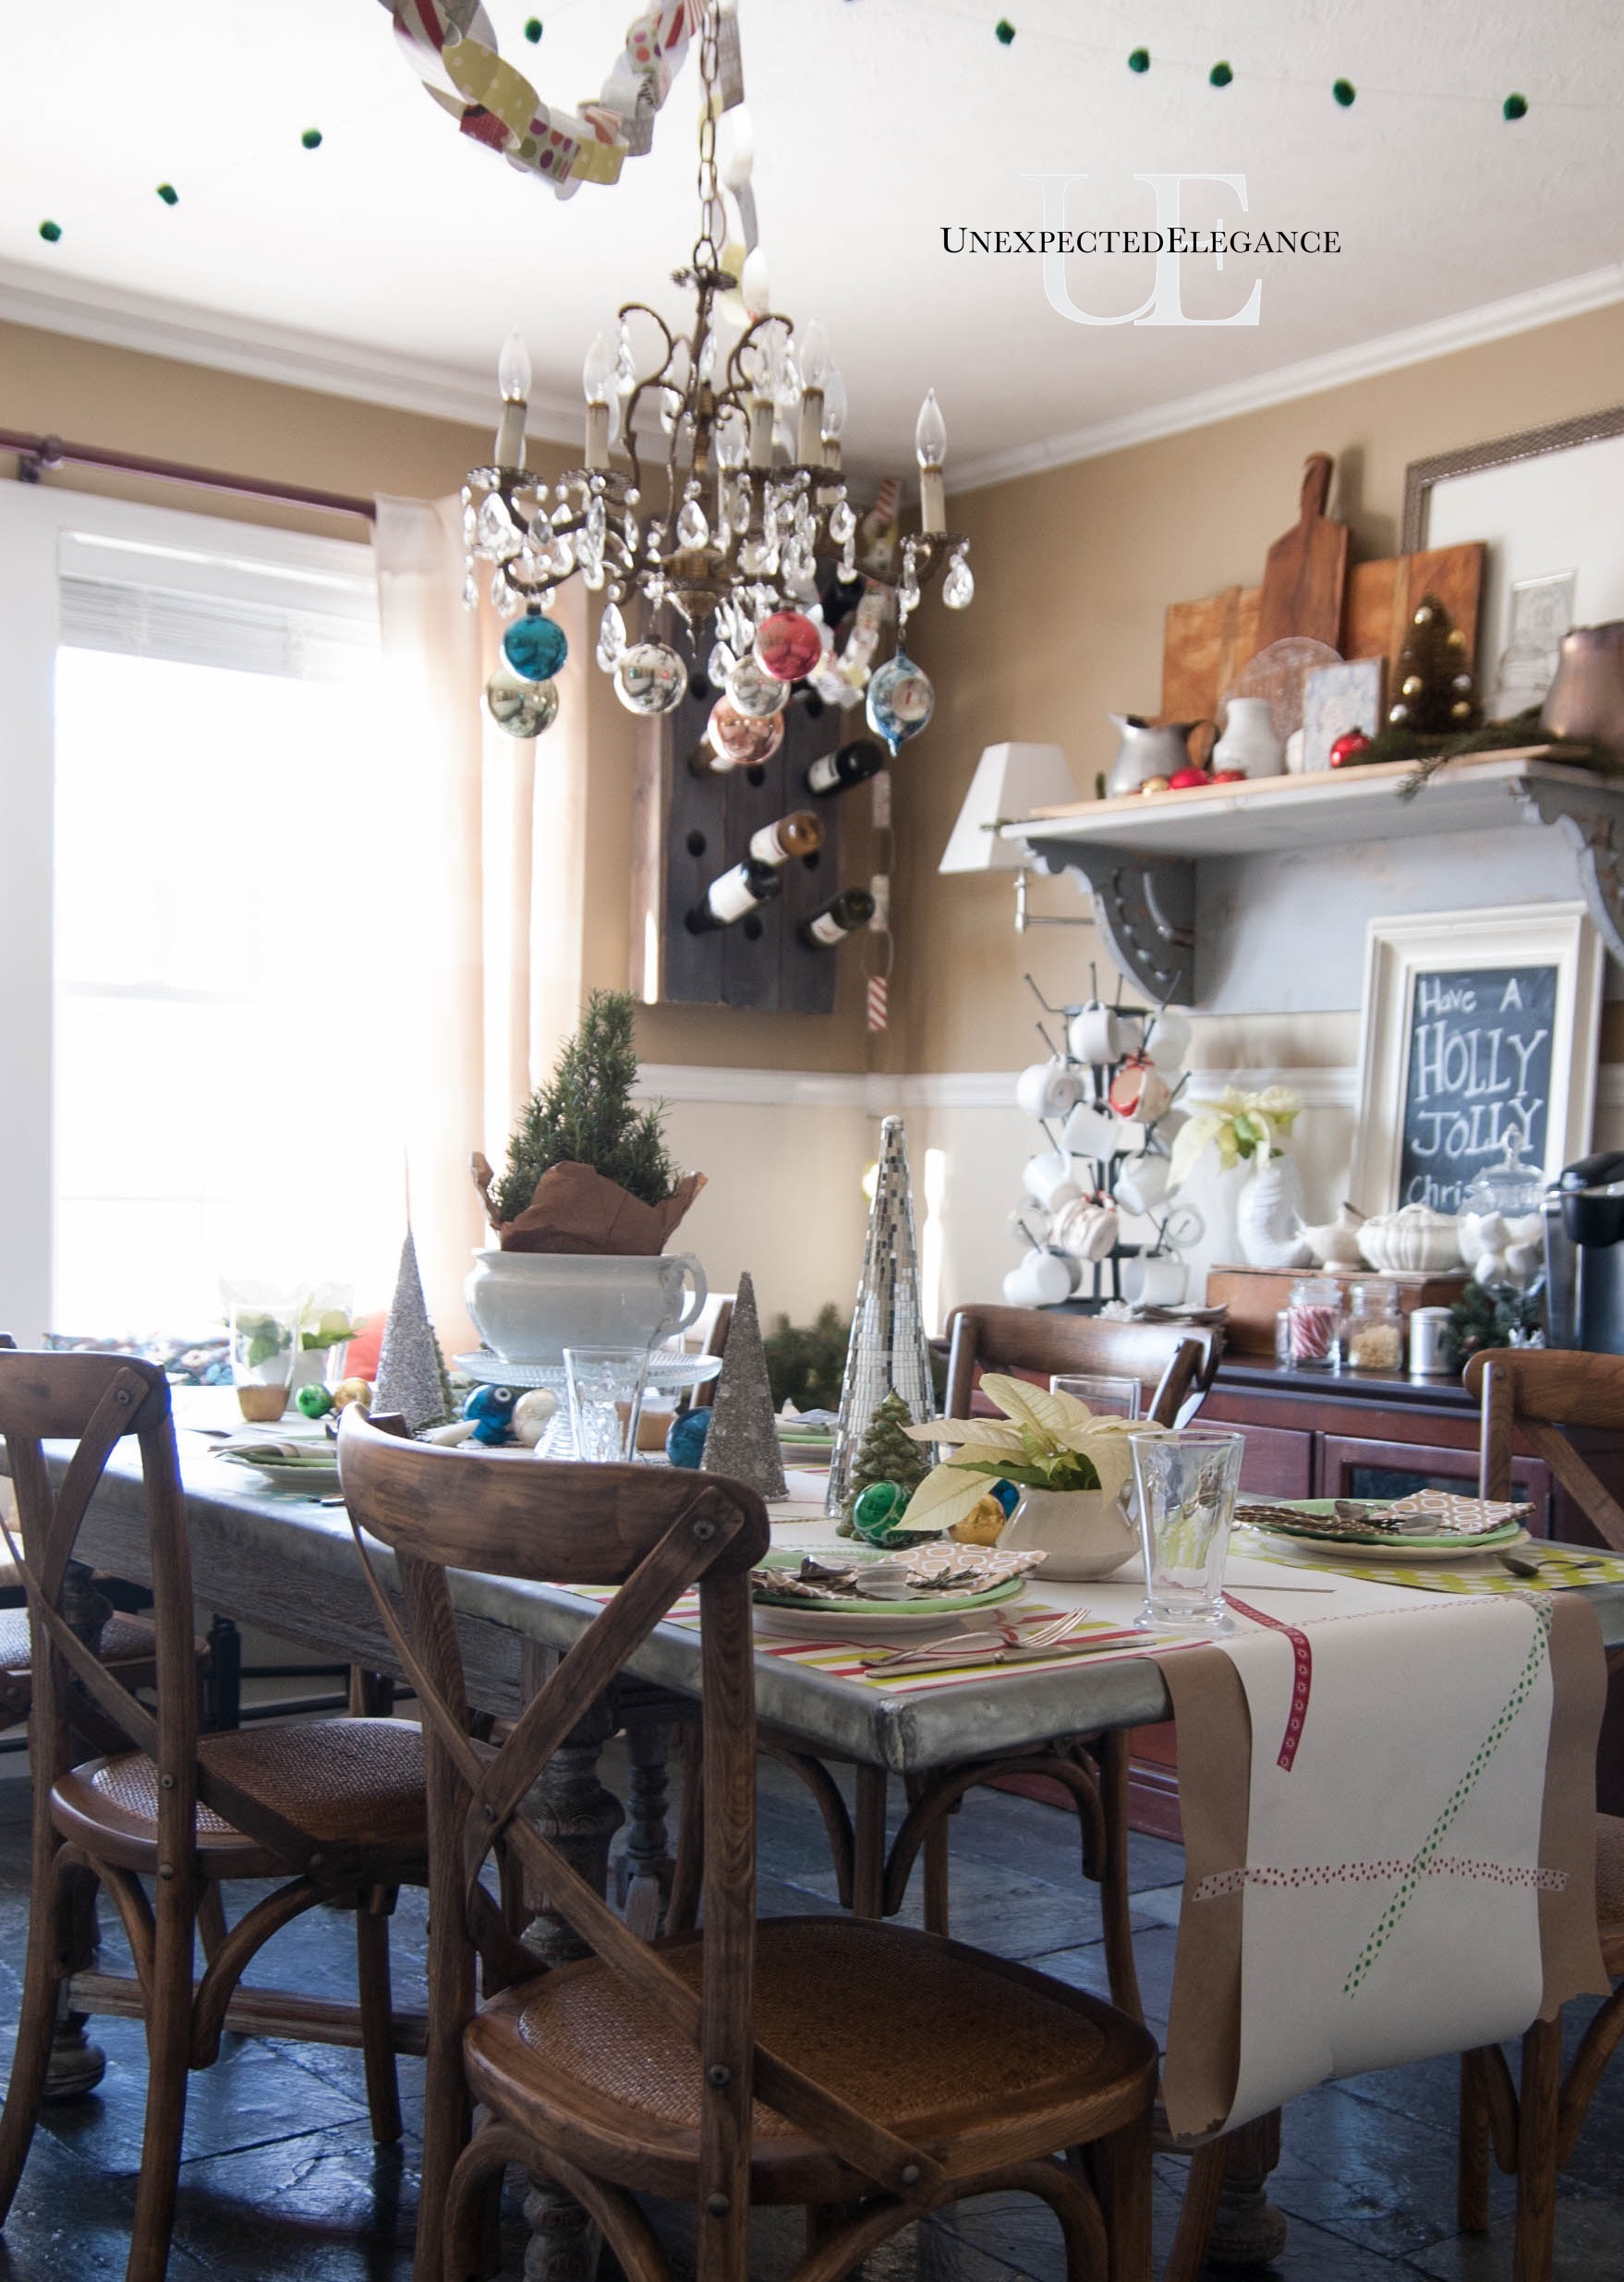 House Tour Christmas 2013 from Unexpected Elegance